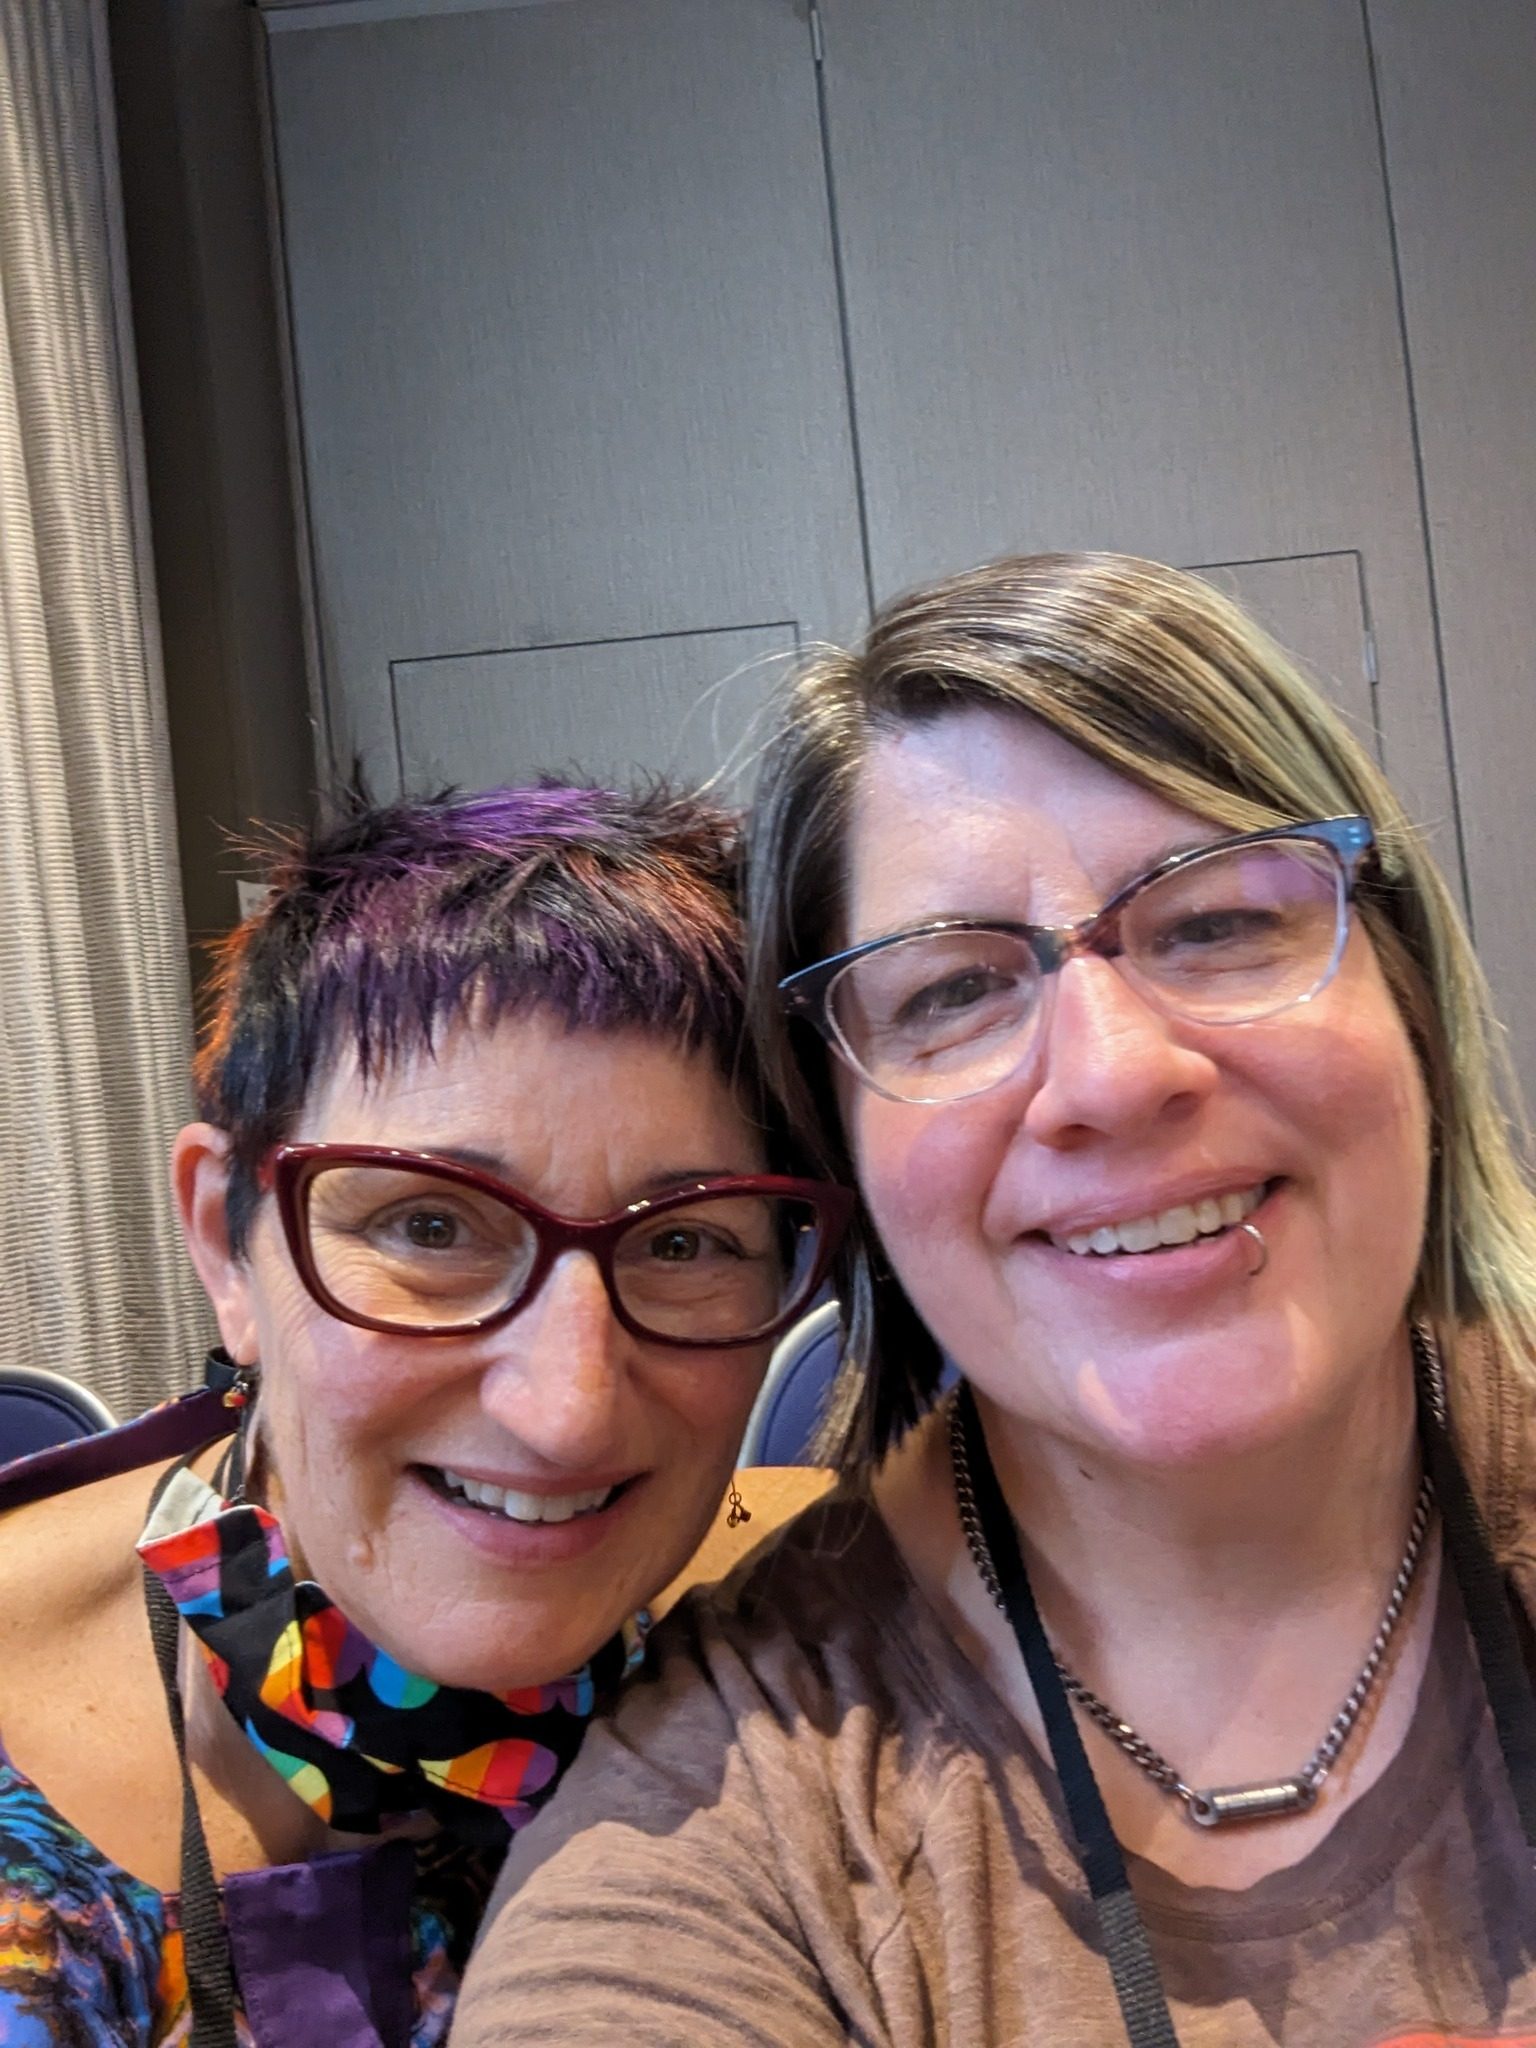 2 middle-aged white women with glasses pose smiling for a selfie